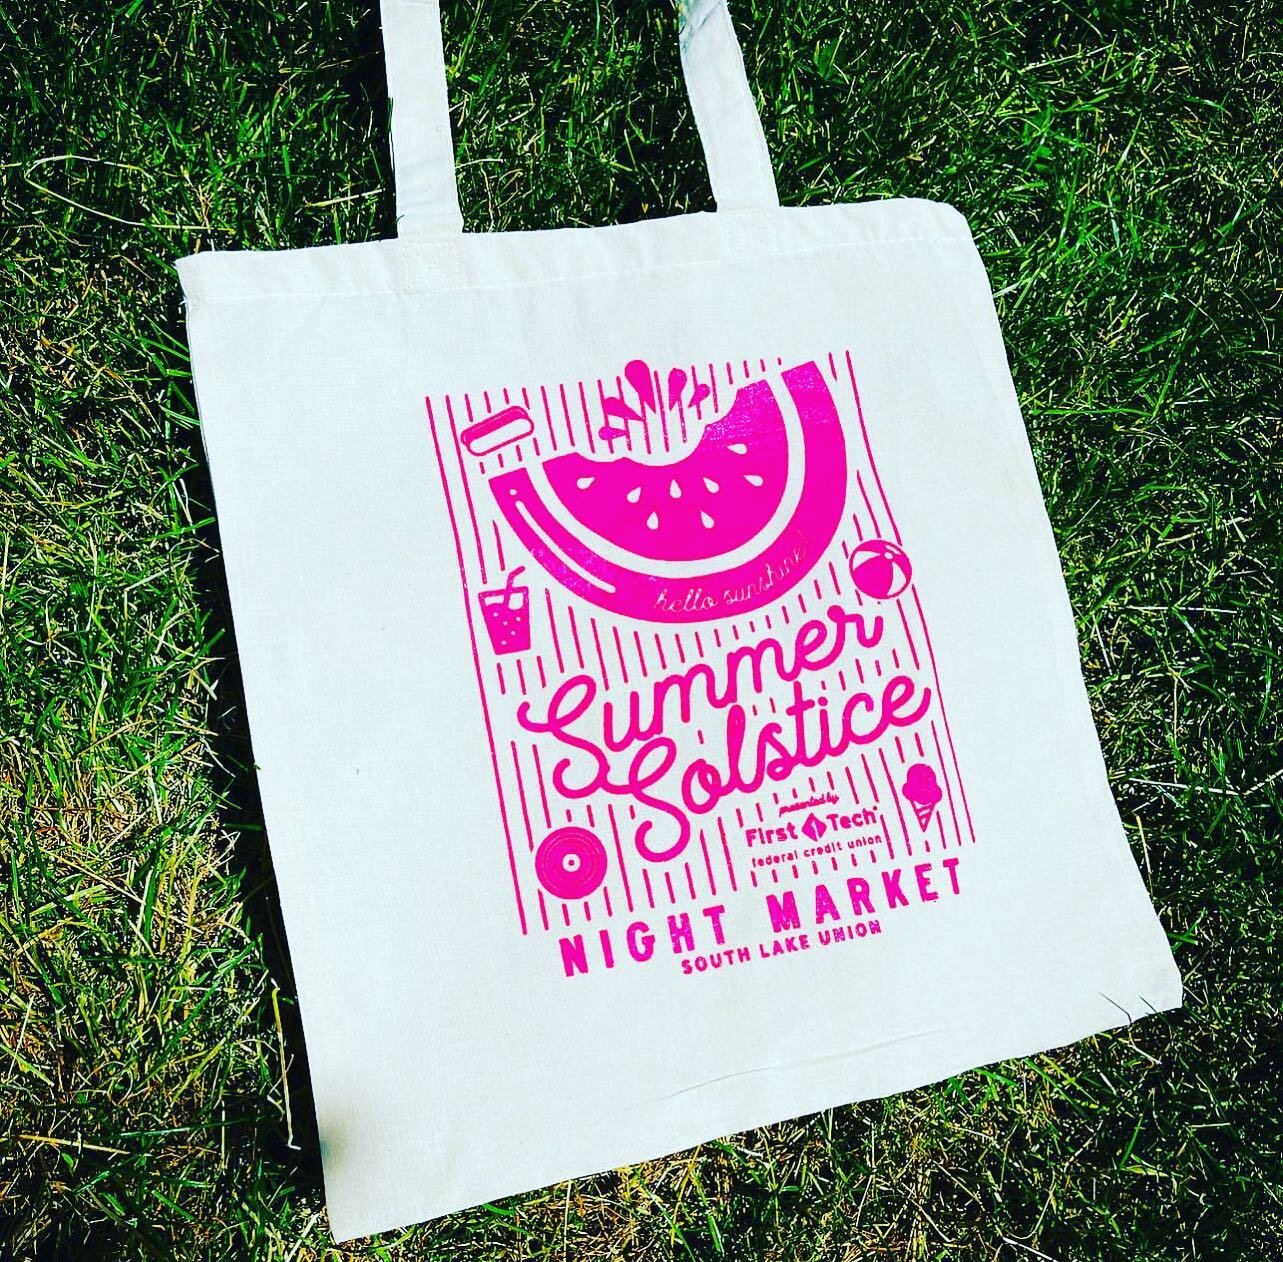 Got plans tomorrow? Pop by the @slusaturdaymarket 11-4pm and spend $25 or more to receive a complimentary market tote courtesy of @firsttechfed for the upcoming Summer Solstice Night Market happening in @southlakeunion on July 16th by @seattlenightma